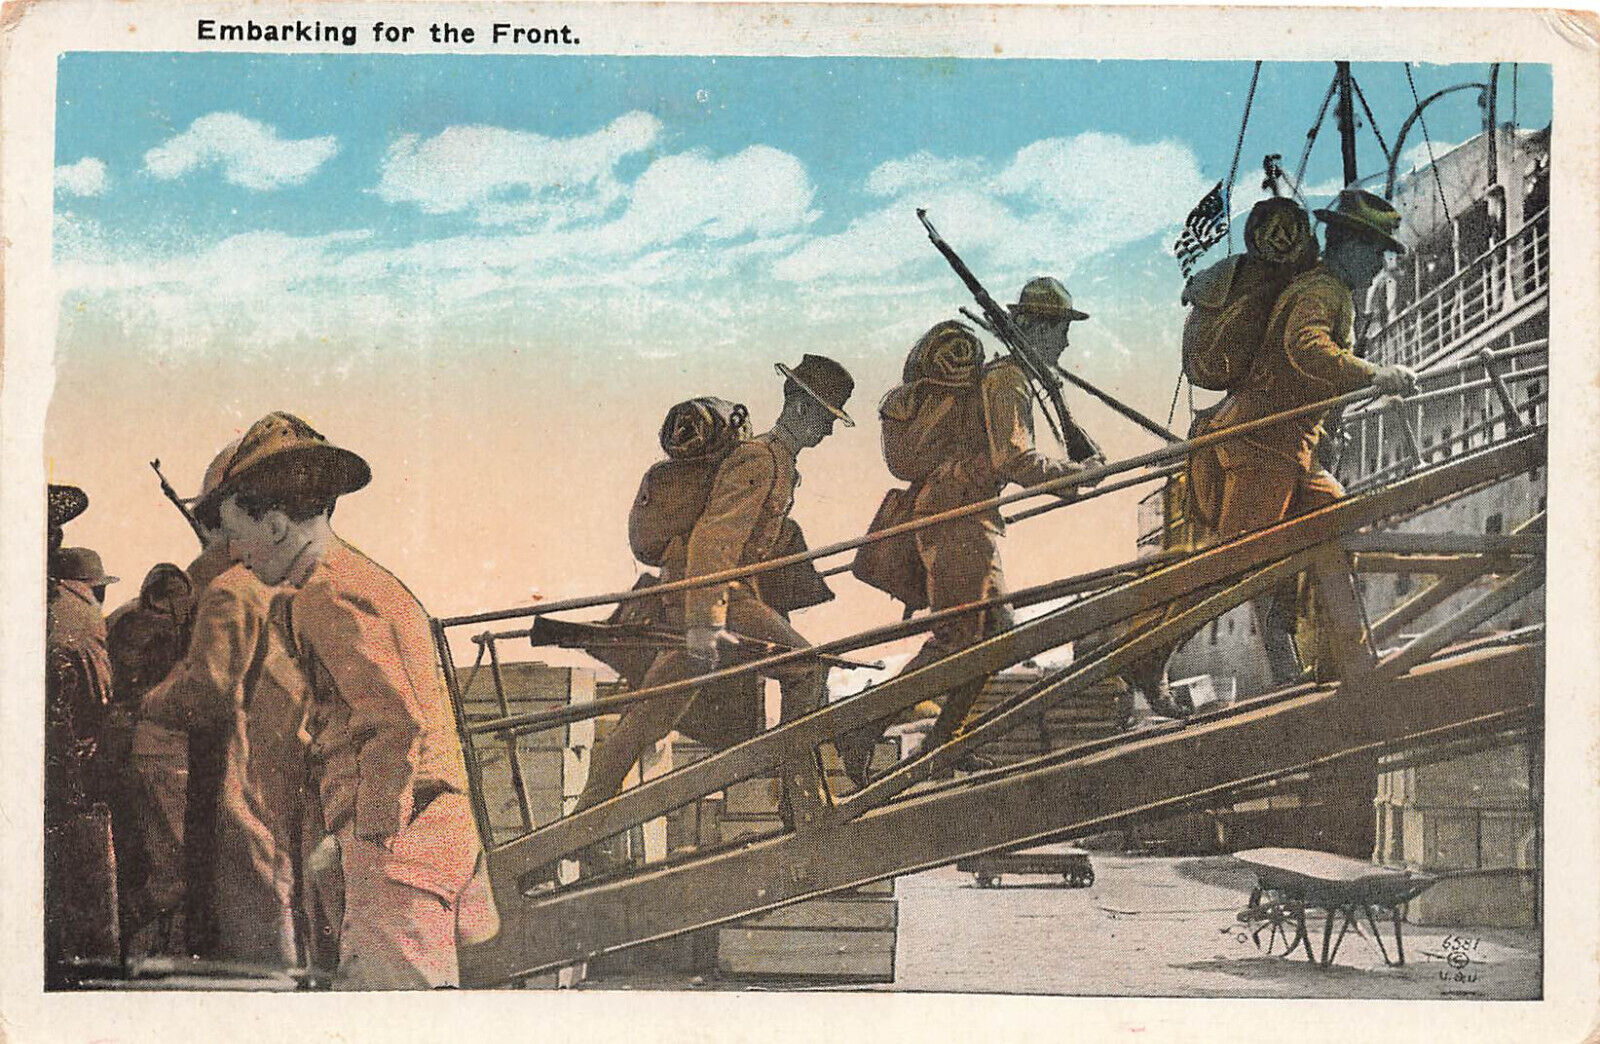 VINTAGE WWI POSTCARD US ARMY SOLDIERS EMBARKING FOR THE FRONT c1917 012524 T